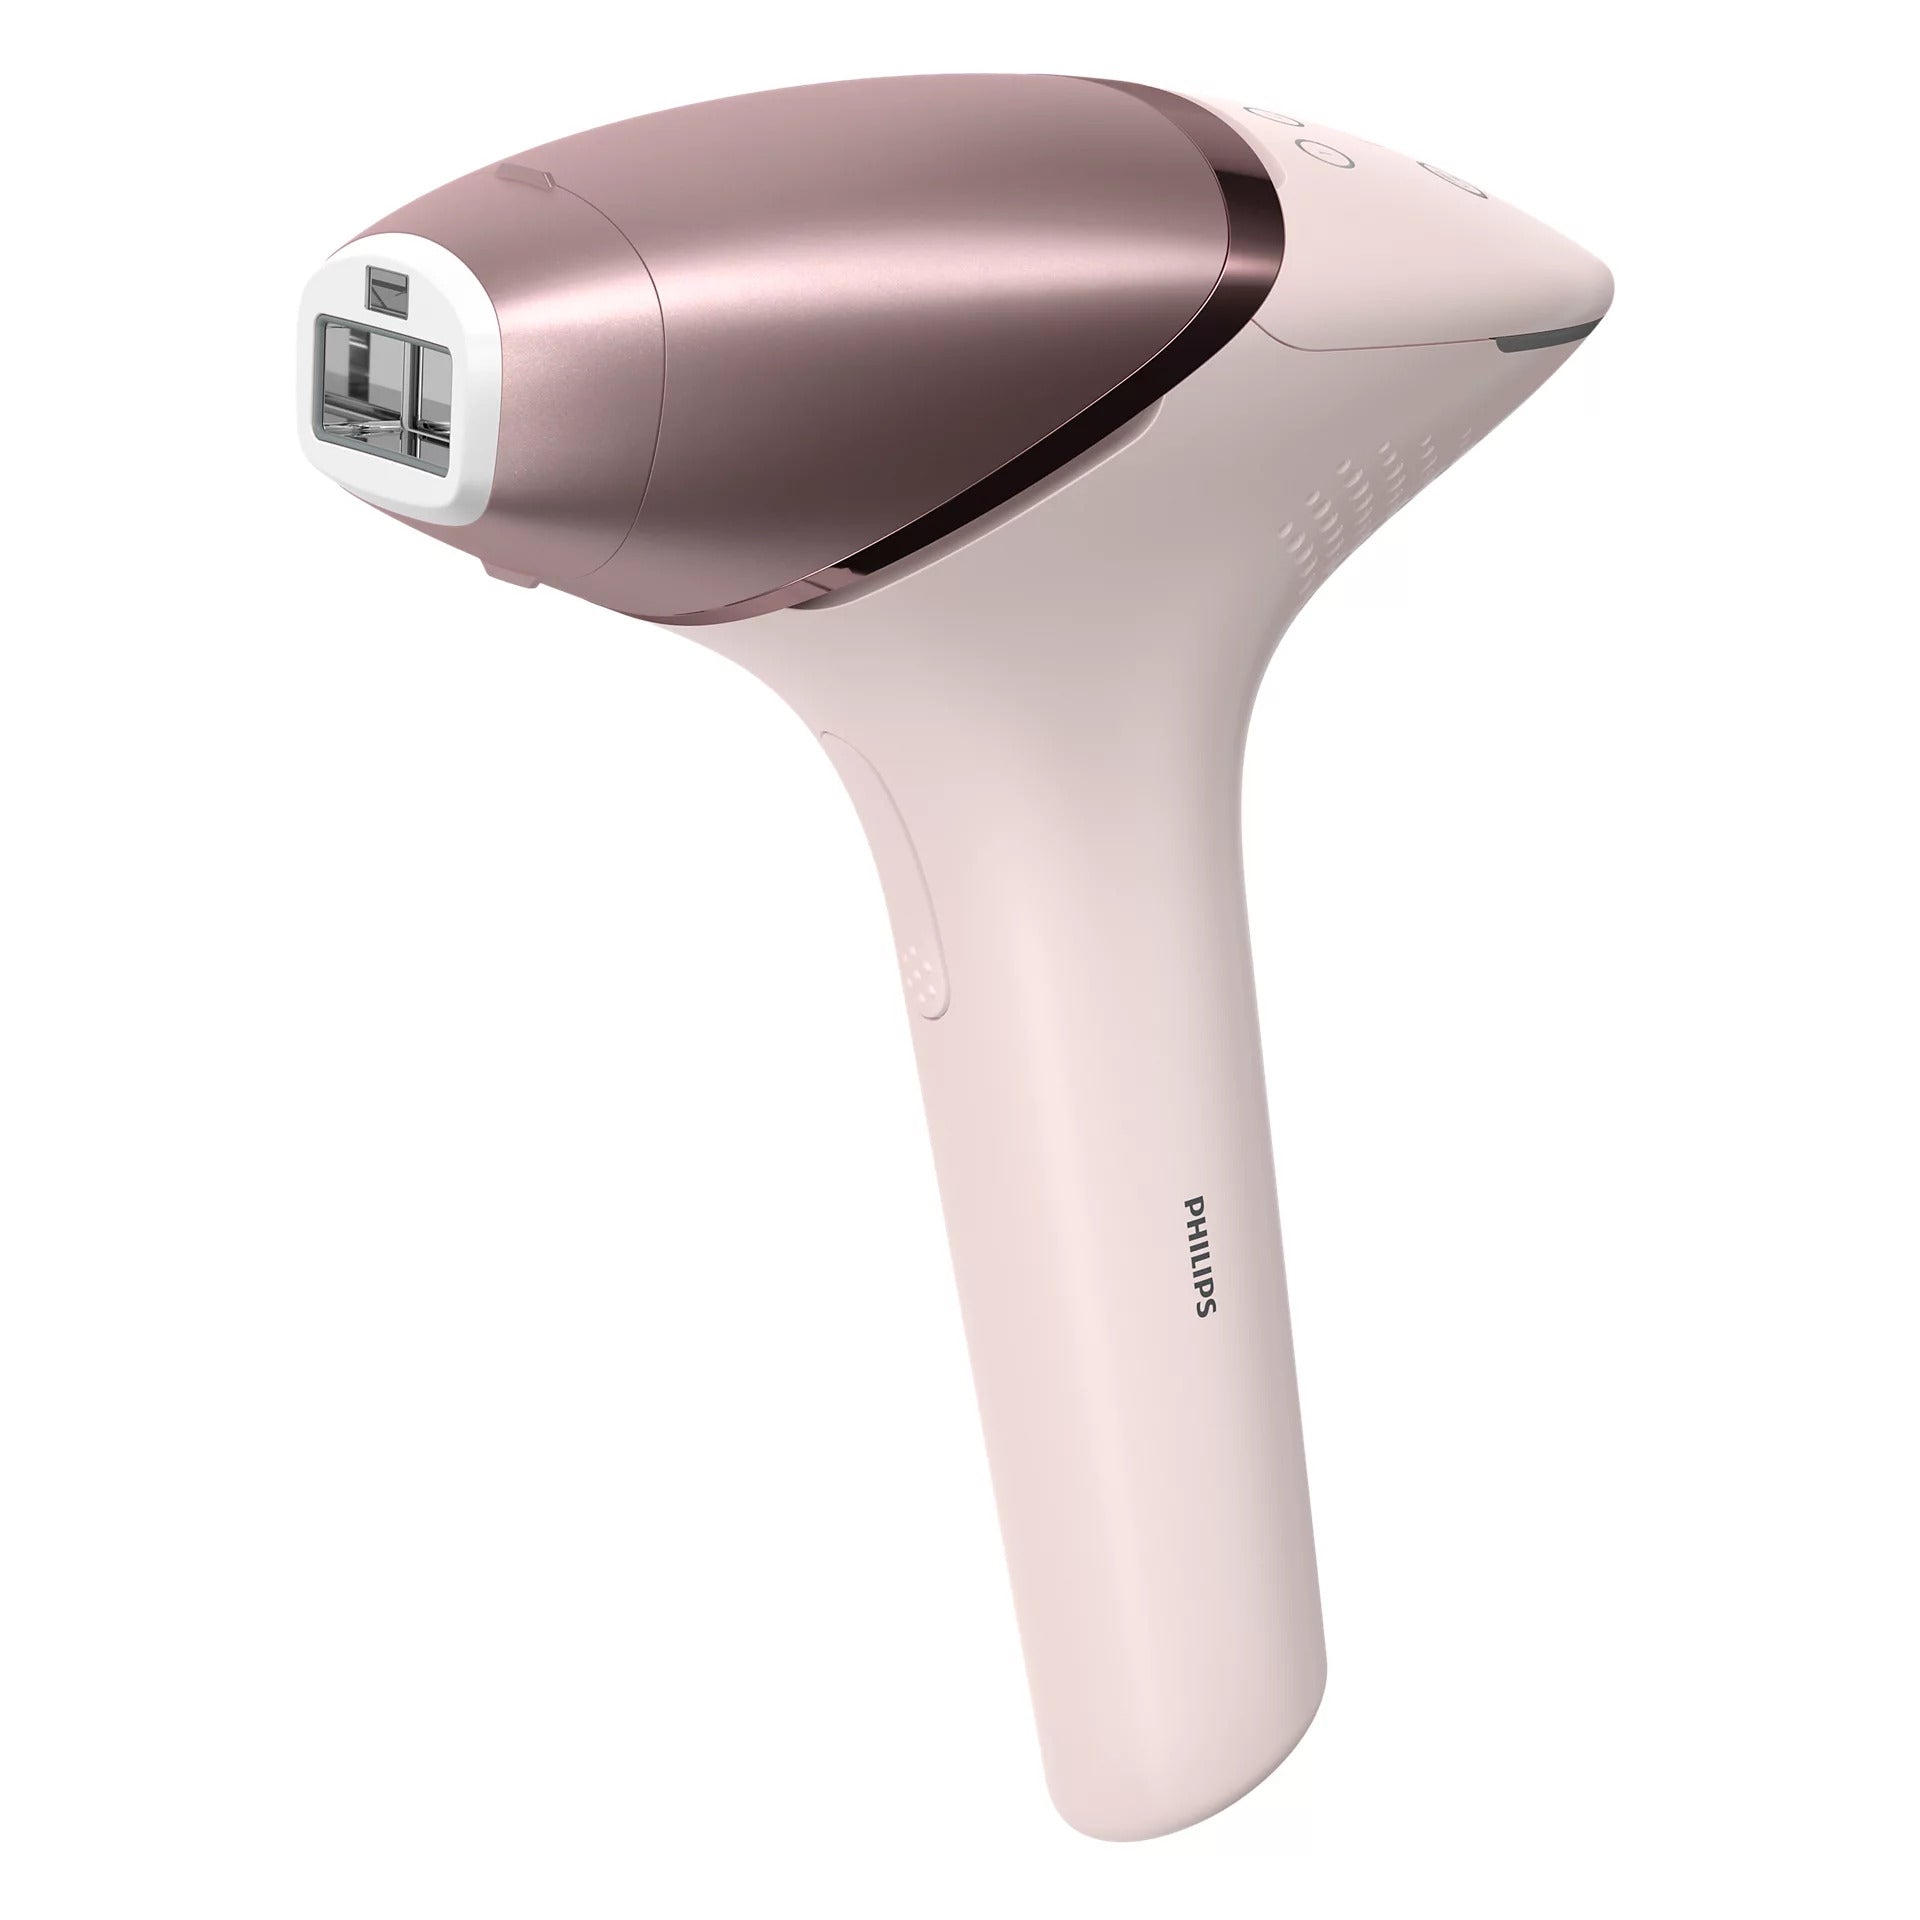 Get the Philips Lumea Series 9000 IPL device for only £38.50 a month